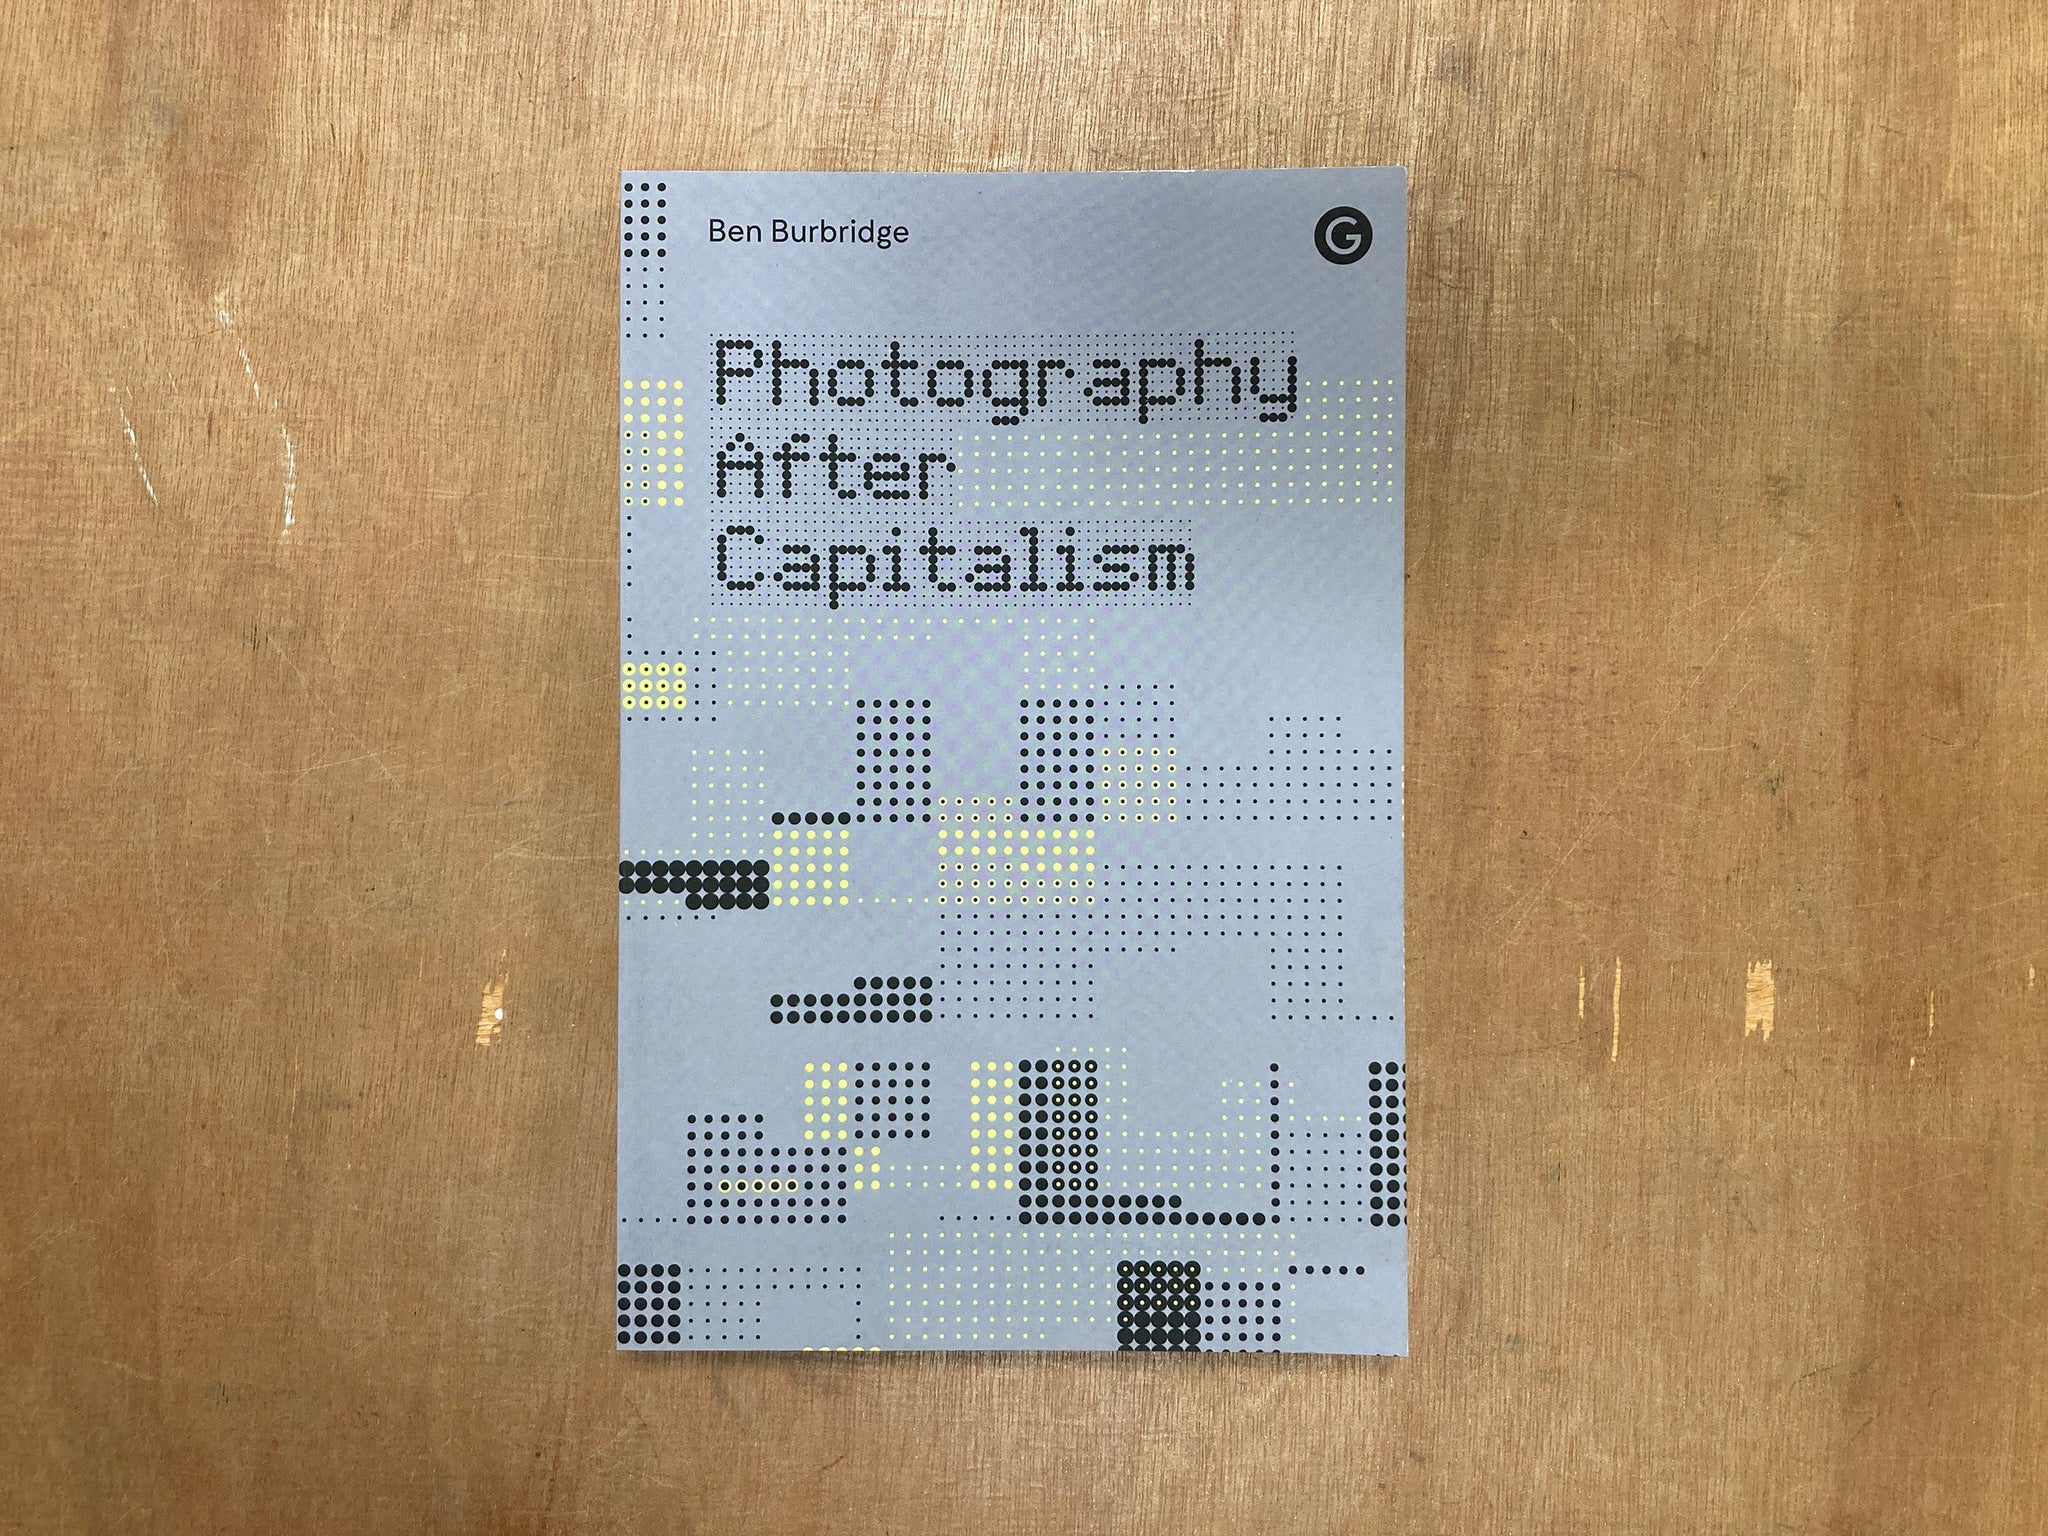 PHOTOGRAPHY AFTER CAPITALISM by Ben Burbridge